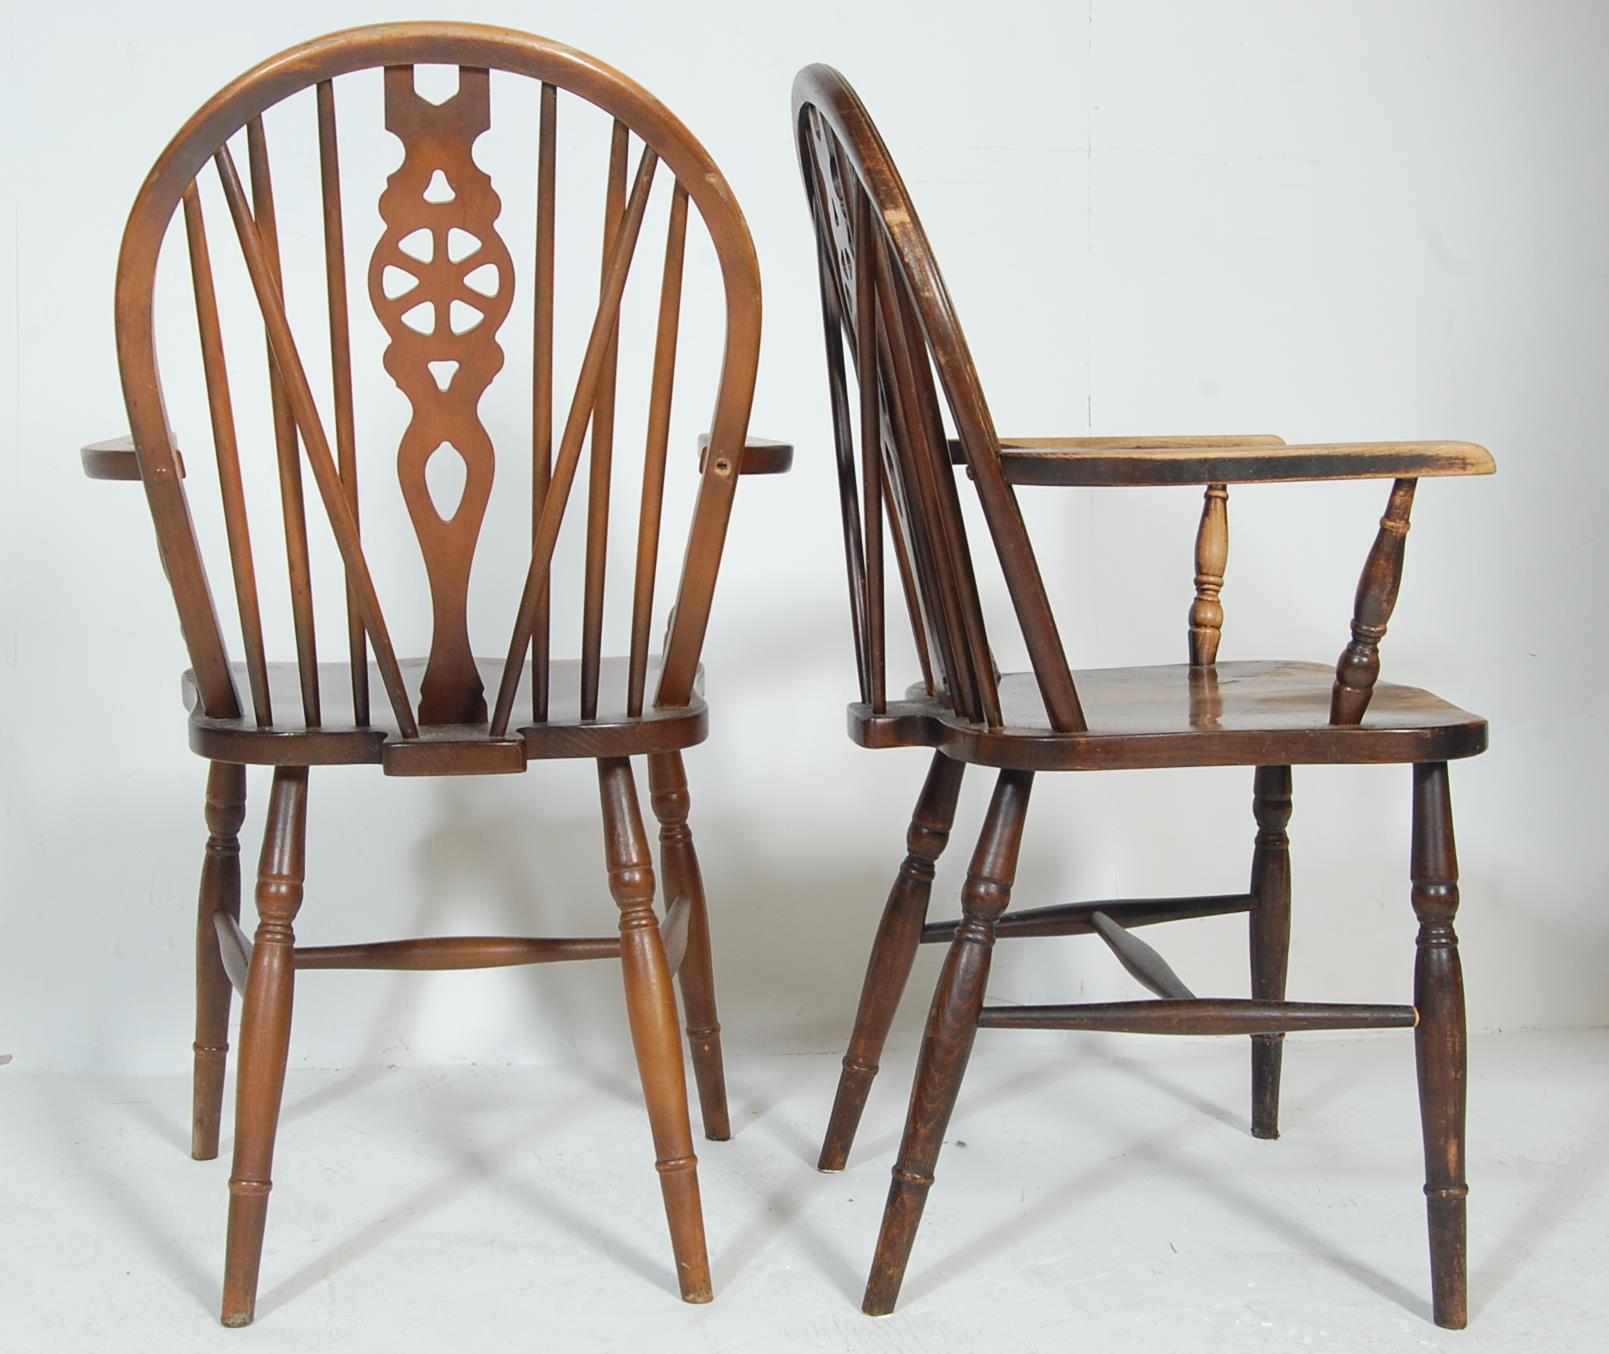 HARLEQUIN SET OF FOUR VINTAGE MID CENTURY KITCHEN DINING CHAIRS - Image 4 of 6